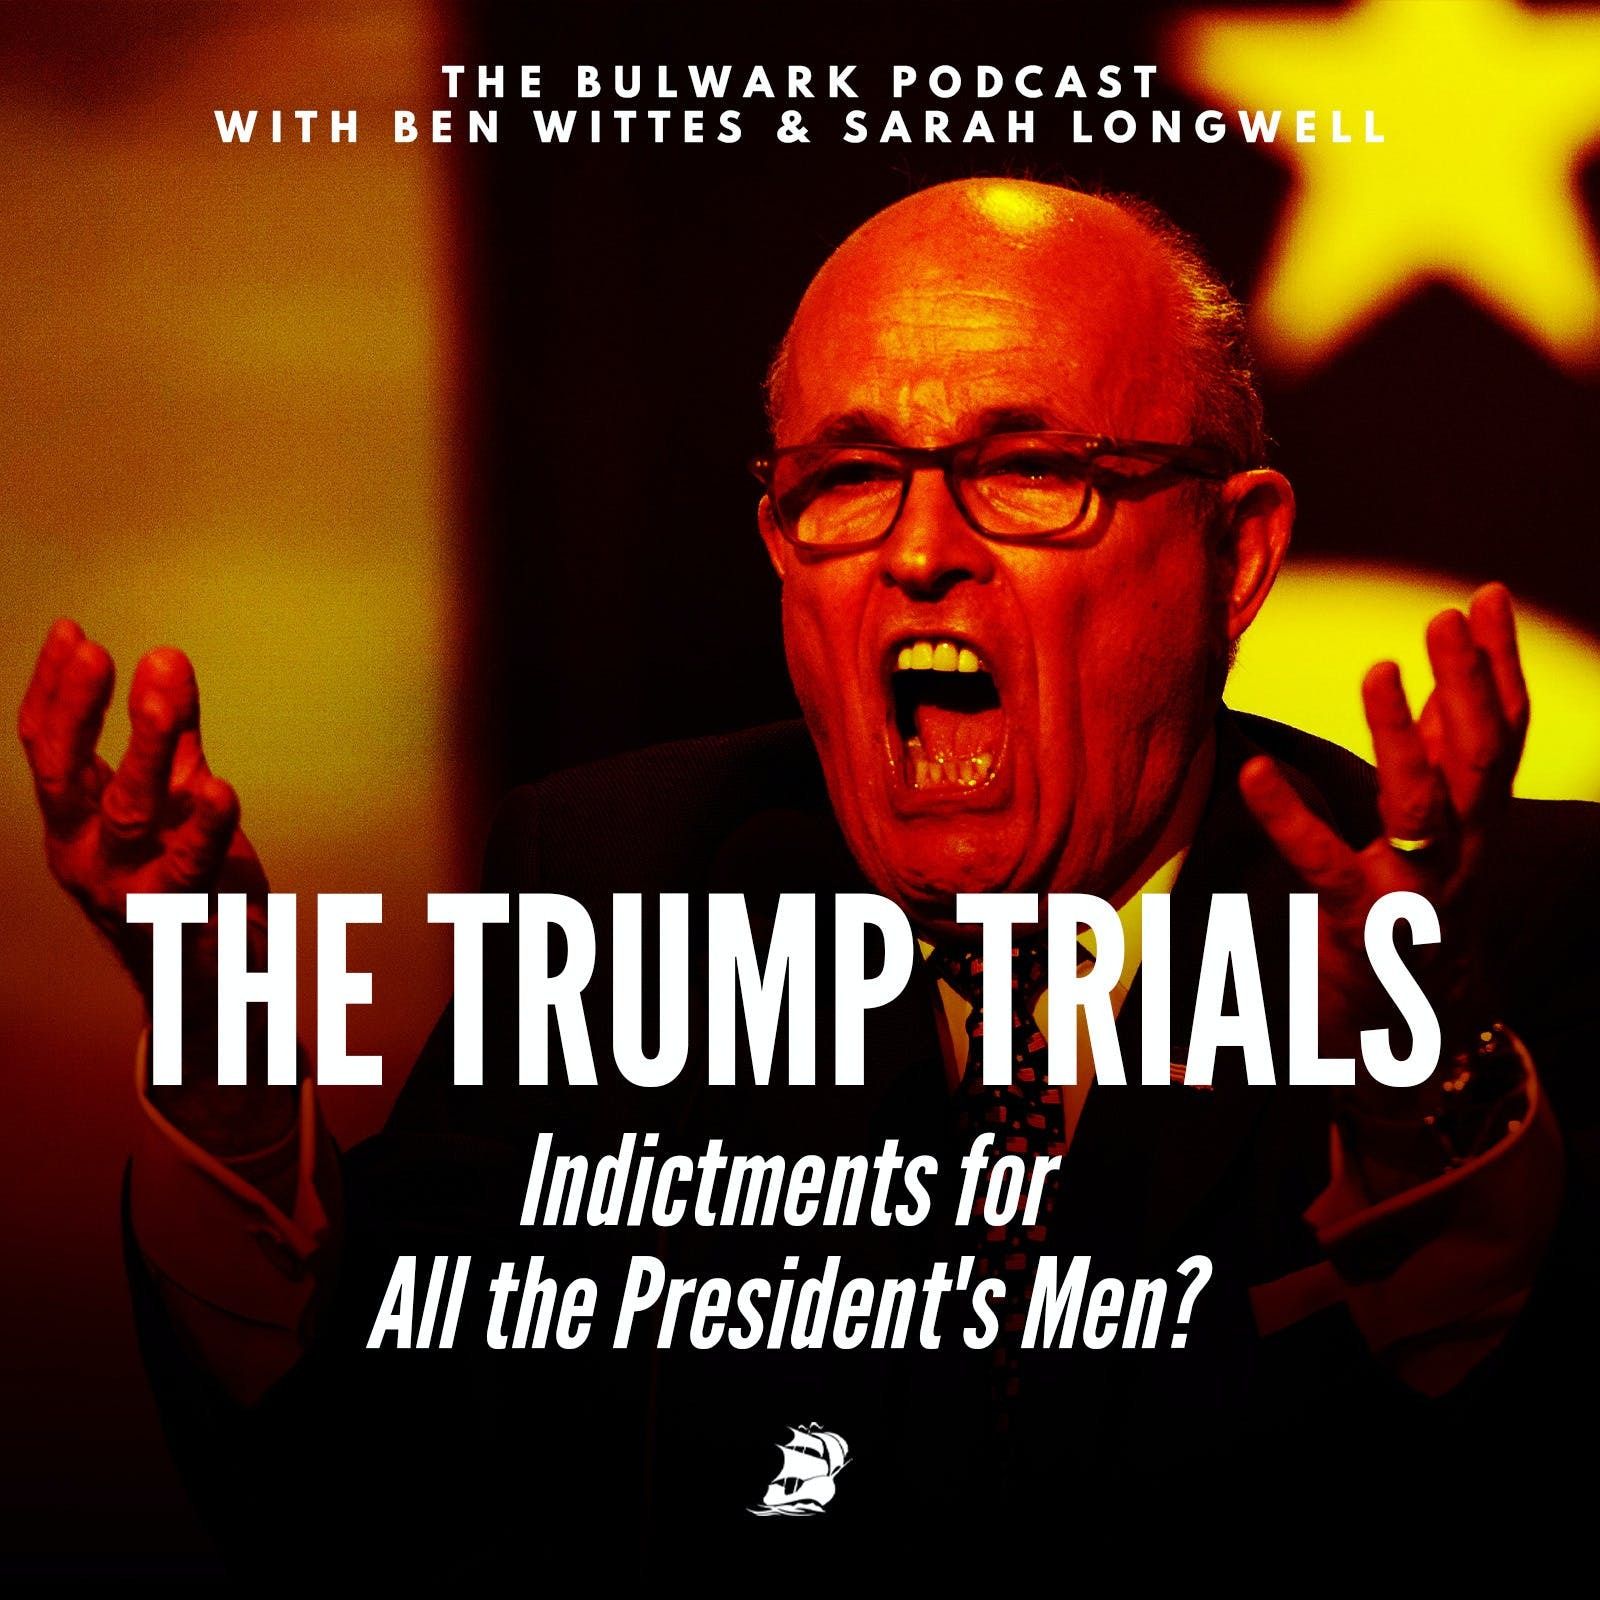 Indictments for All the President's Men?